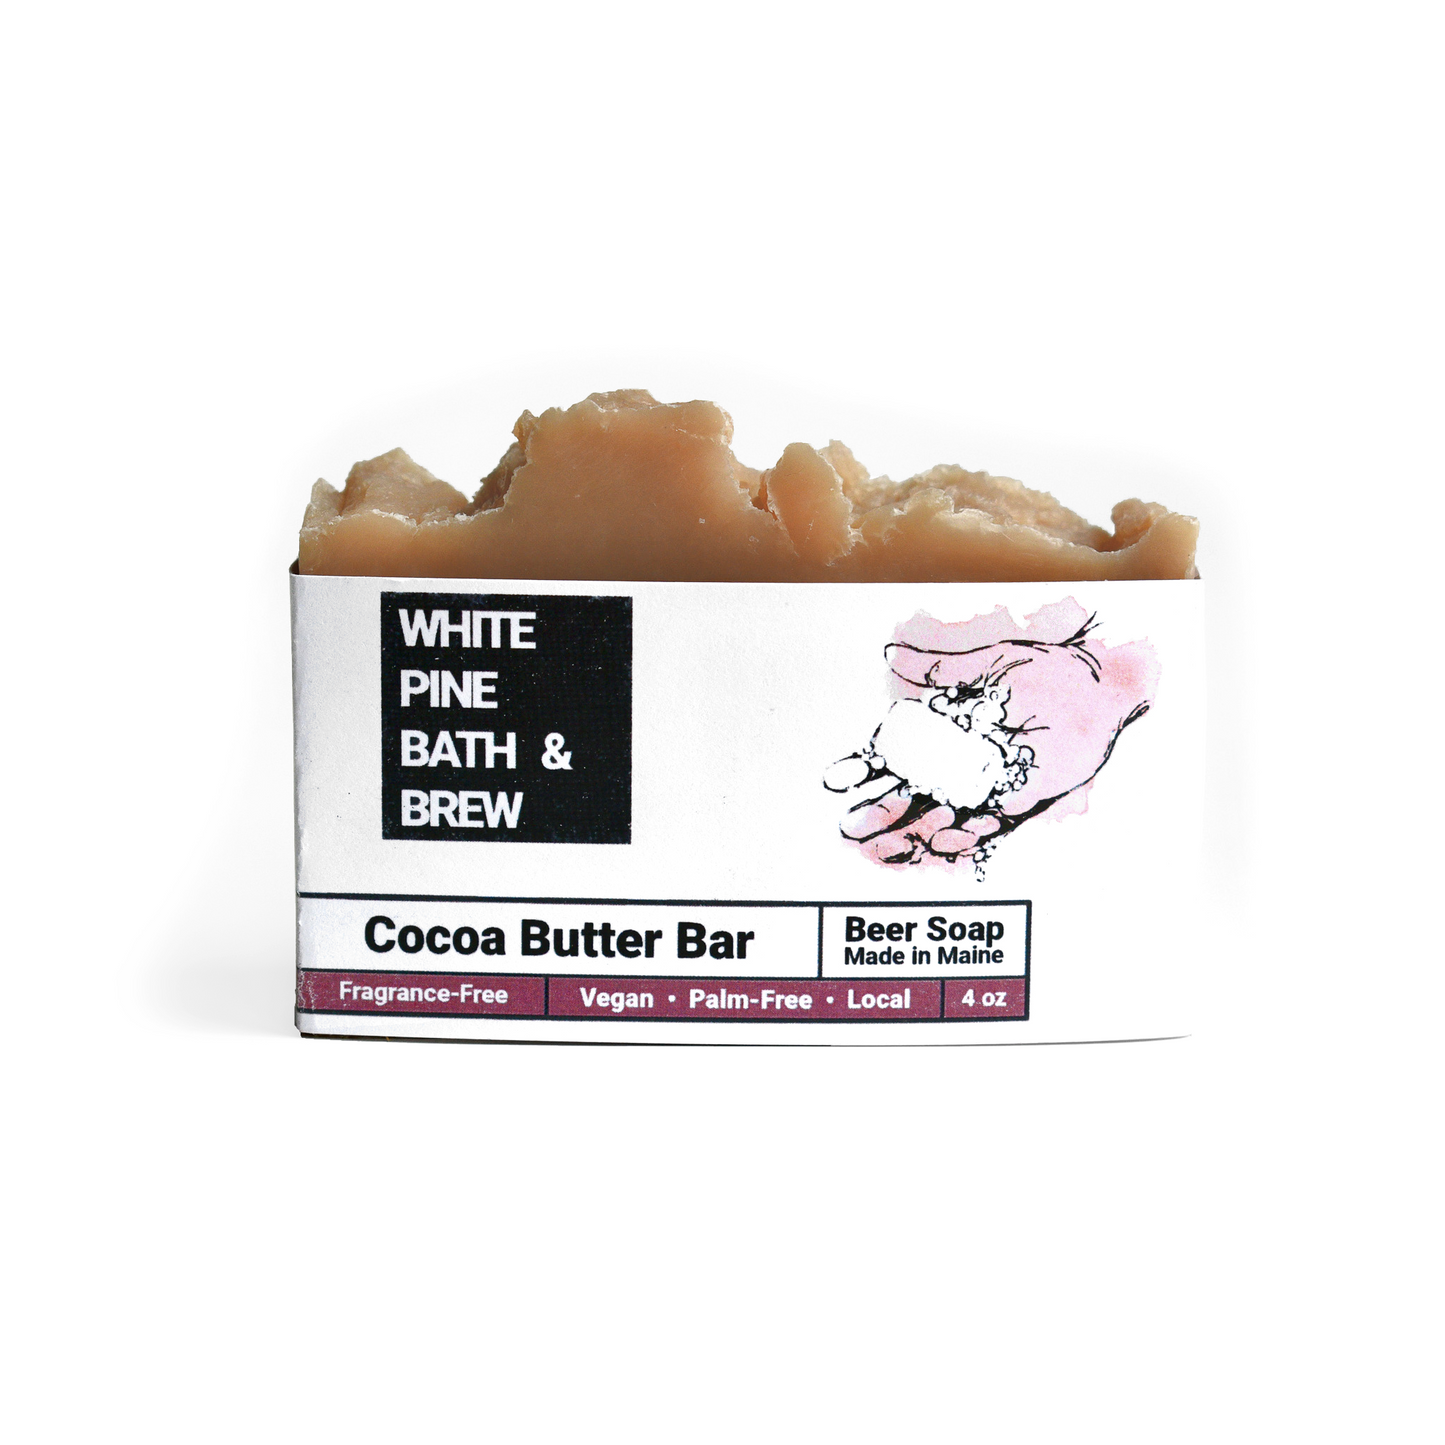 Cocoa Butter Bar - Fragrance Free - Gift Set